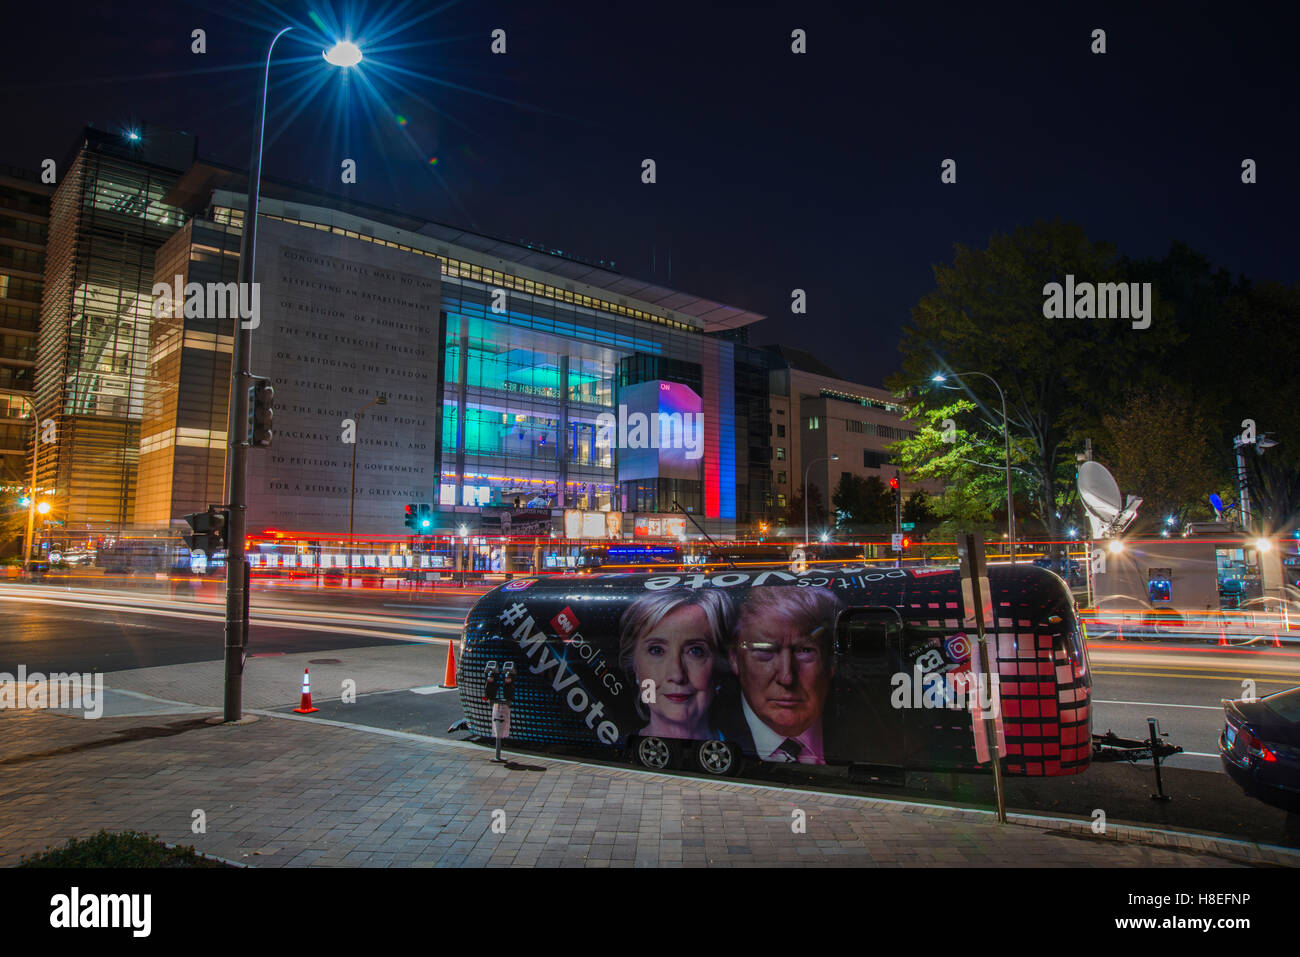 My Vote, CNN Politics media booth. Night street view of CNN trailer with Presidential candidates Hillary & Trump. Pennsylvania ave in front of Newseum Stock Photo